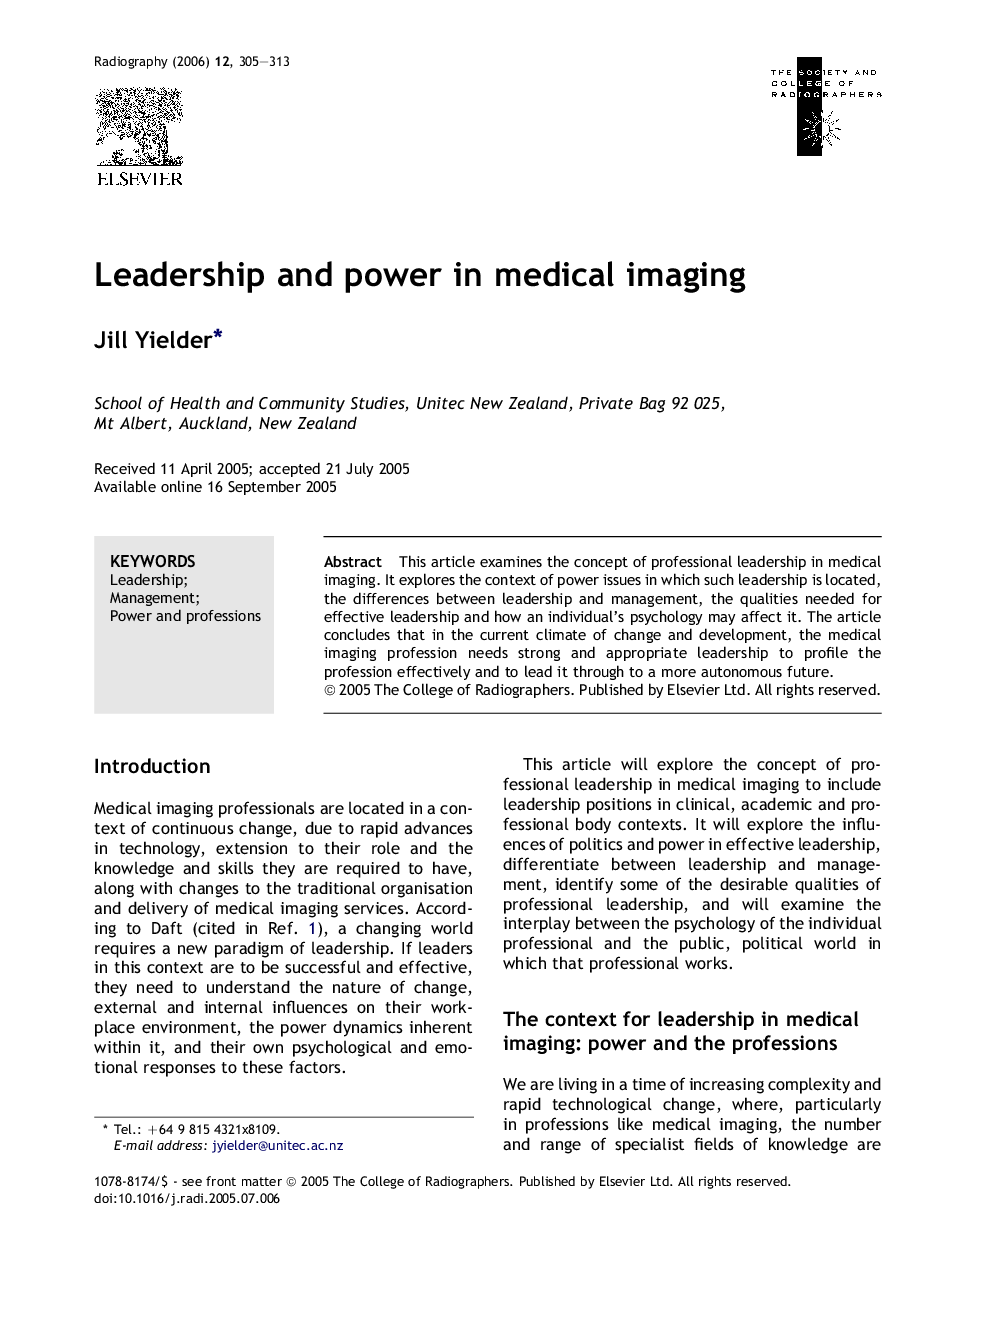 Leadership and power in medical imaging